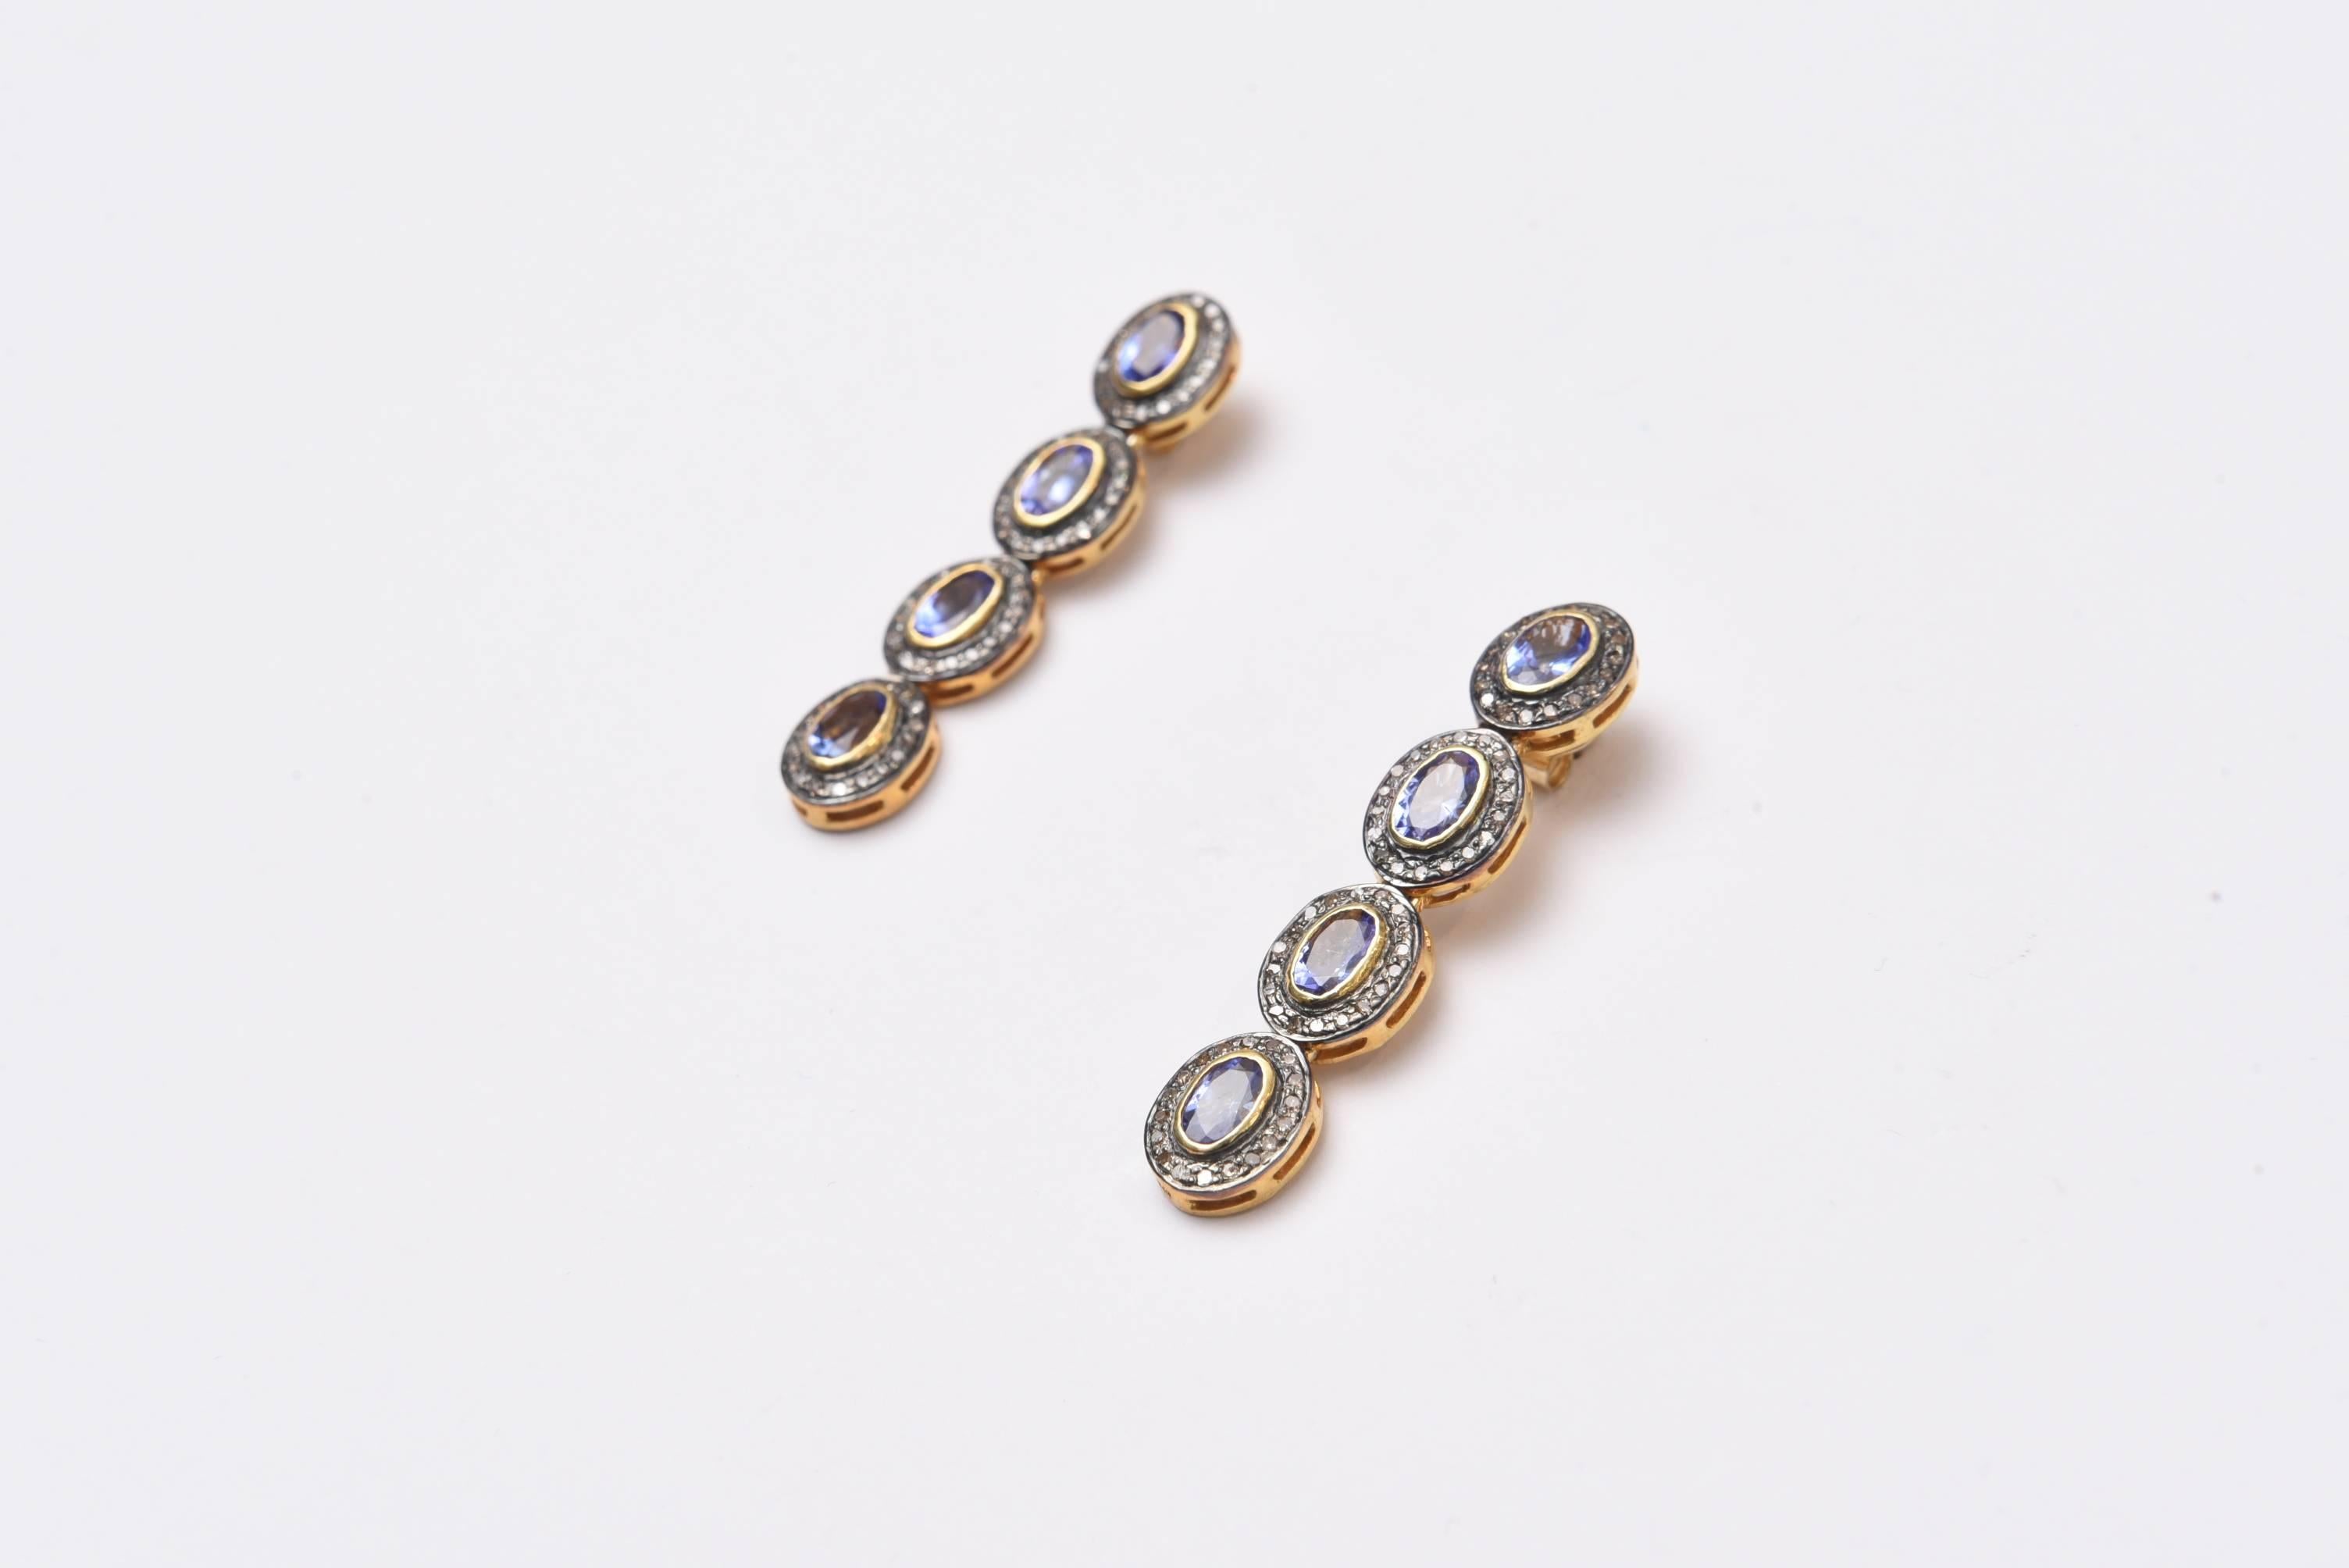 Four hinged, faceted oval tanzanite stones bordered in diamonds set in oxidized sterling silver.  18K gold post for pierced ears.  Carat weight of diamonds is 4.50 and tanzanites are 8 carats.
